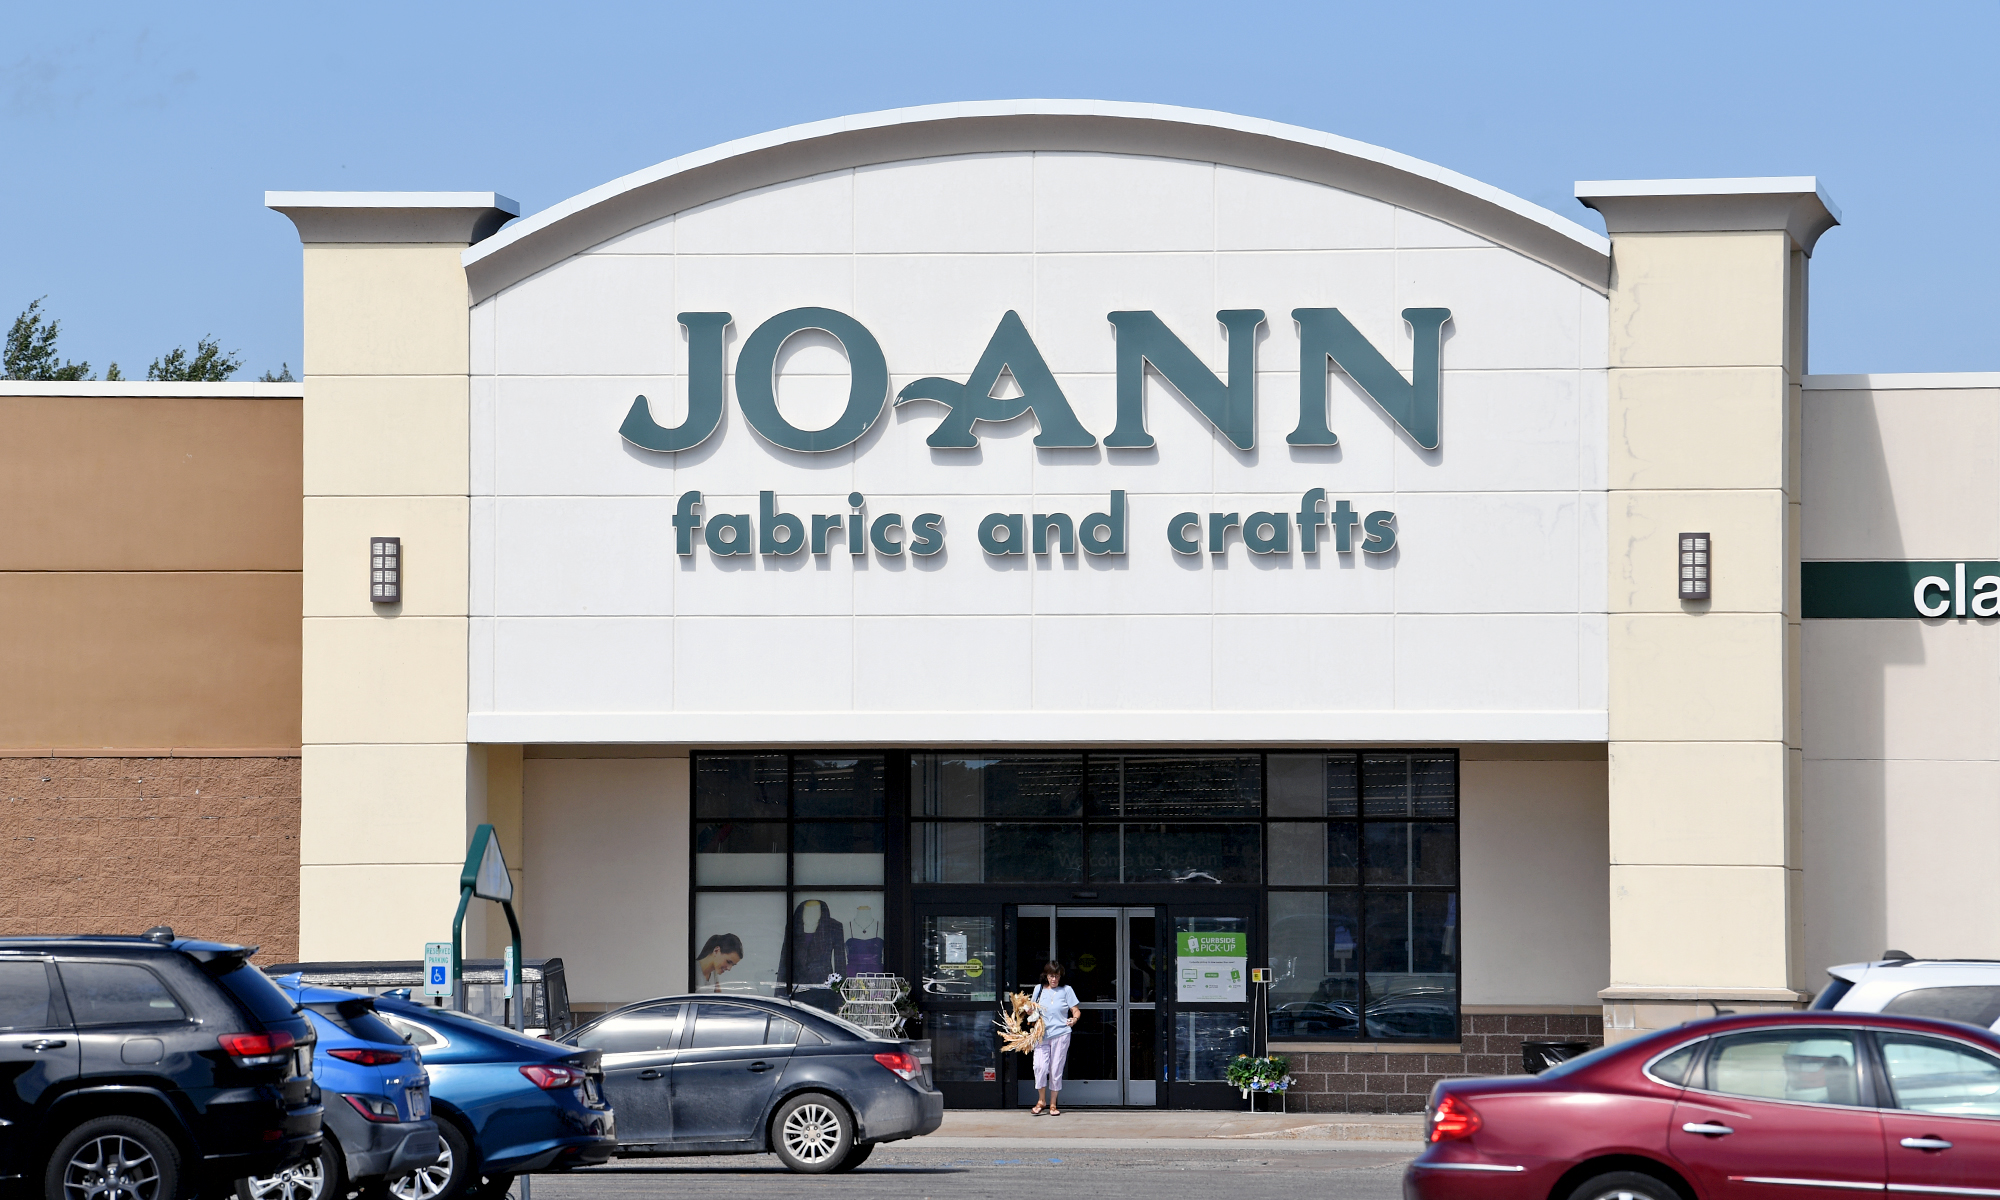 JoAnn Fabrics and Crafts across river not shutting down, manager insists -  Sault Ste. Marie News